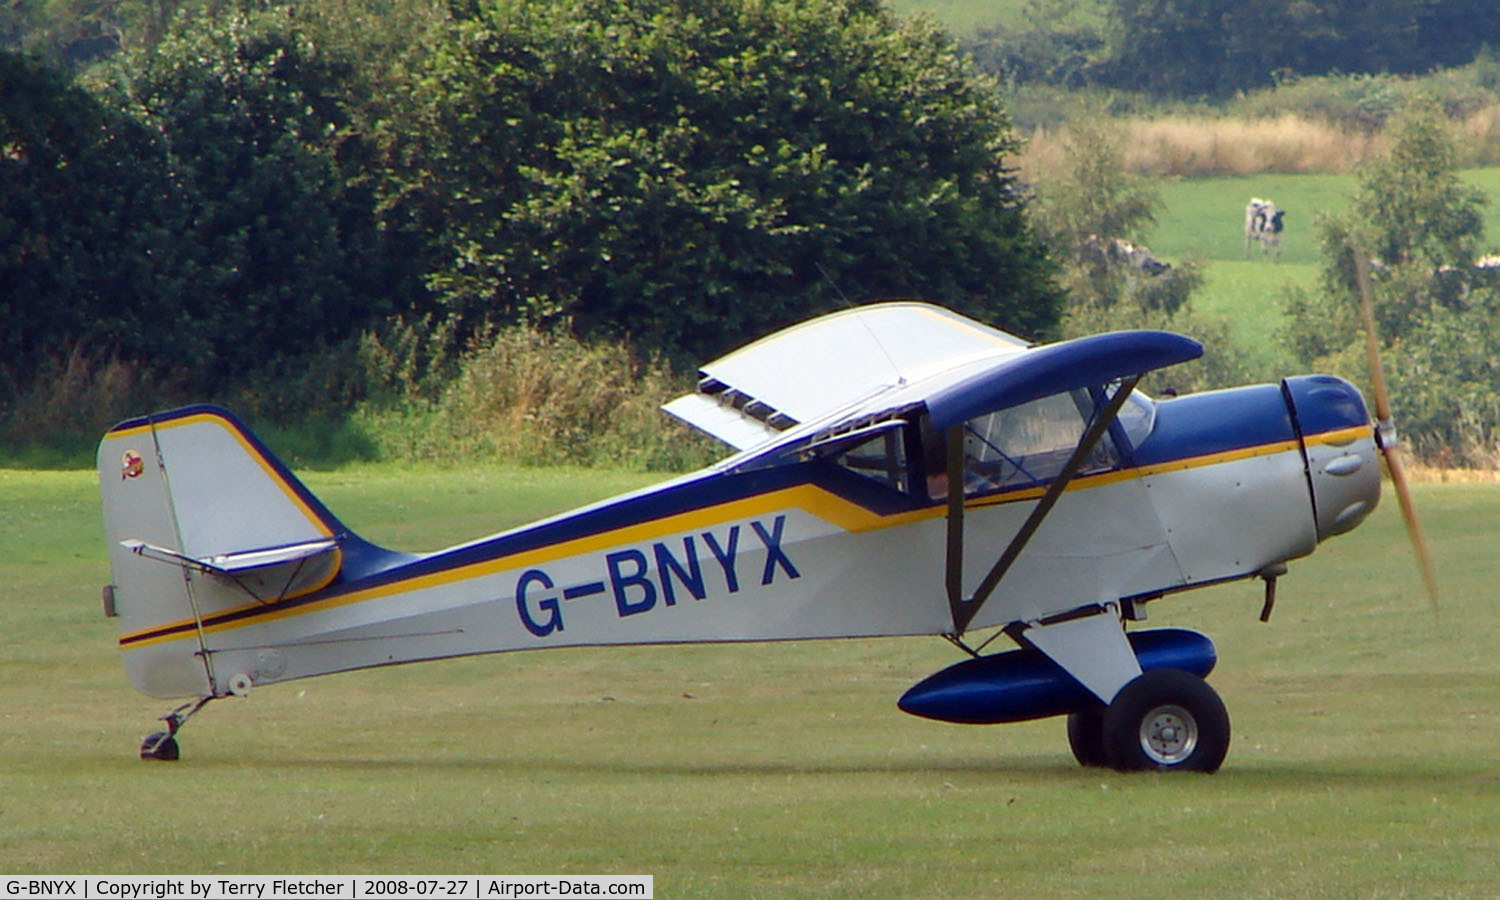 G-BNYX, 1990 Denney Kitfox C/N PFA 172-11285, Denney Kitfox - a visitor to Baxterley Wings and Wheels 2008 , a grass strip in rural Warwickshire in the UK